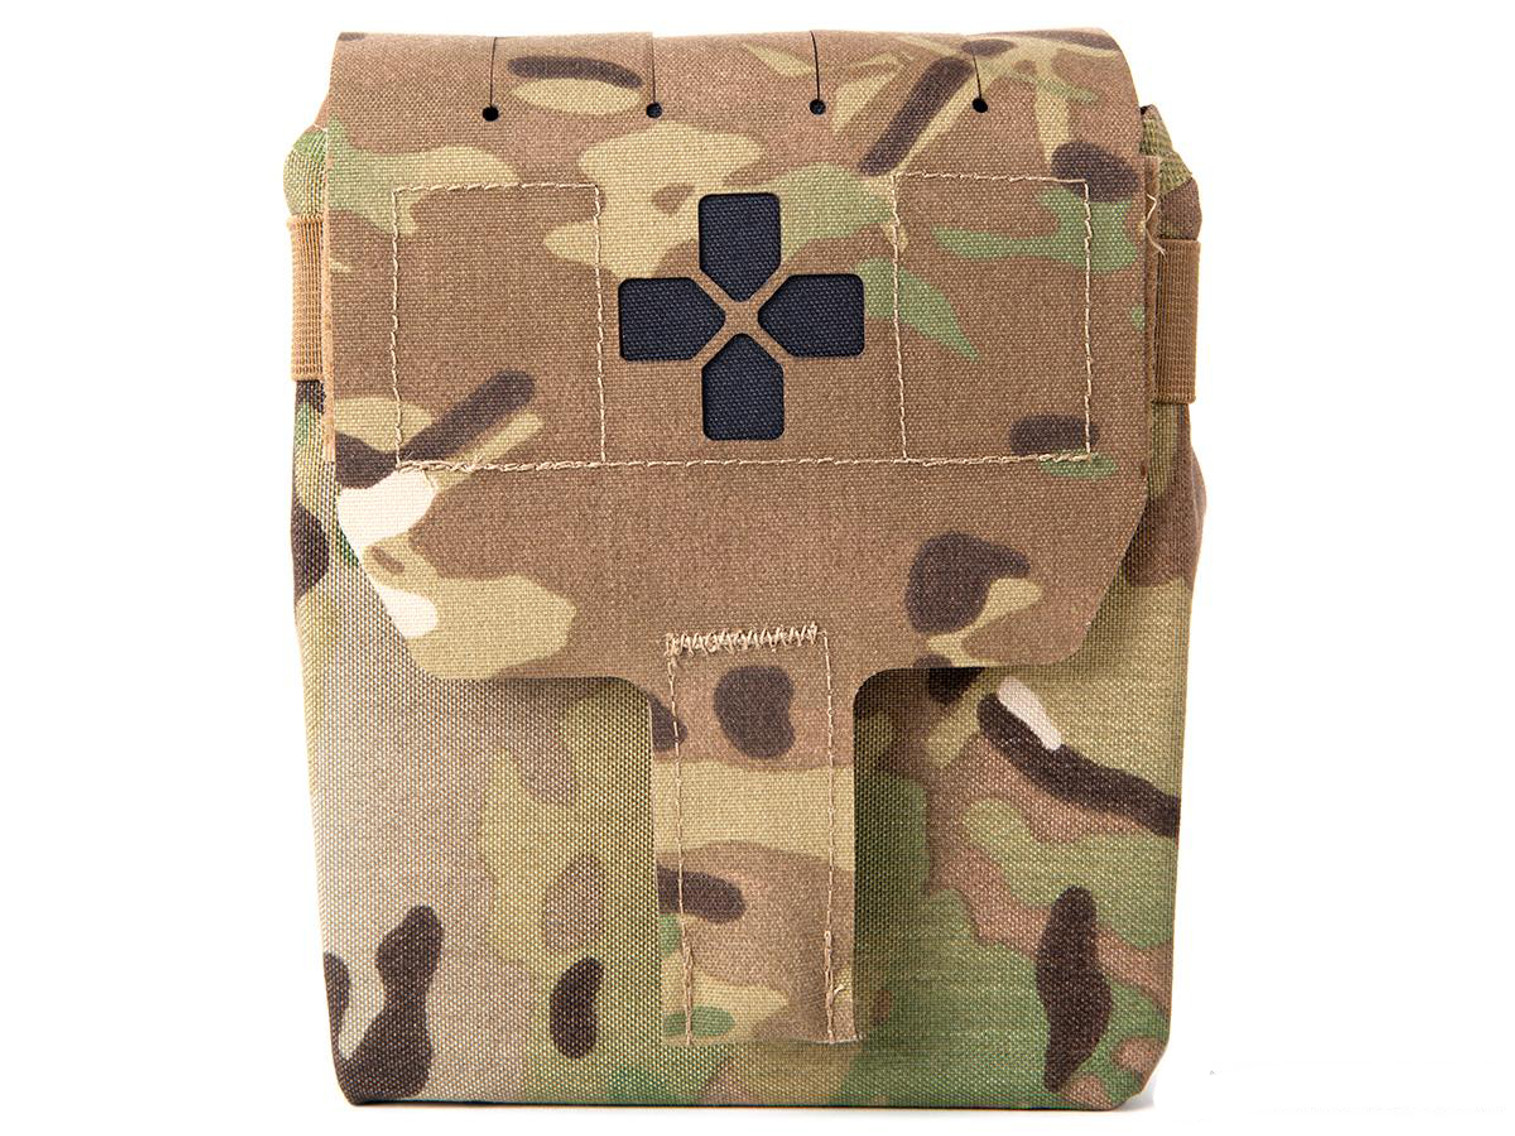 Blue Force Gear Filled Trauma Kit NOW! (Color: Multicam)